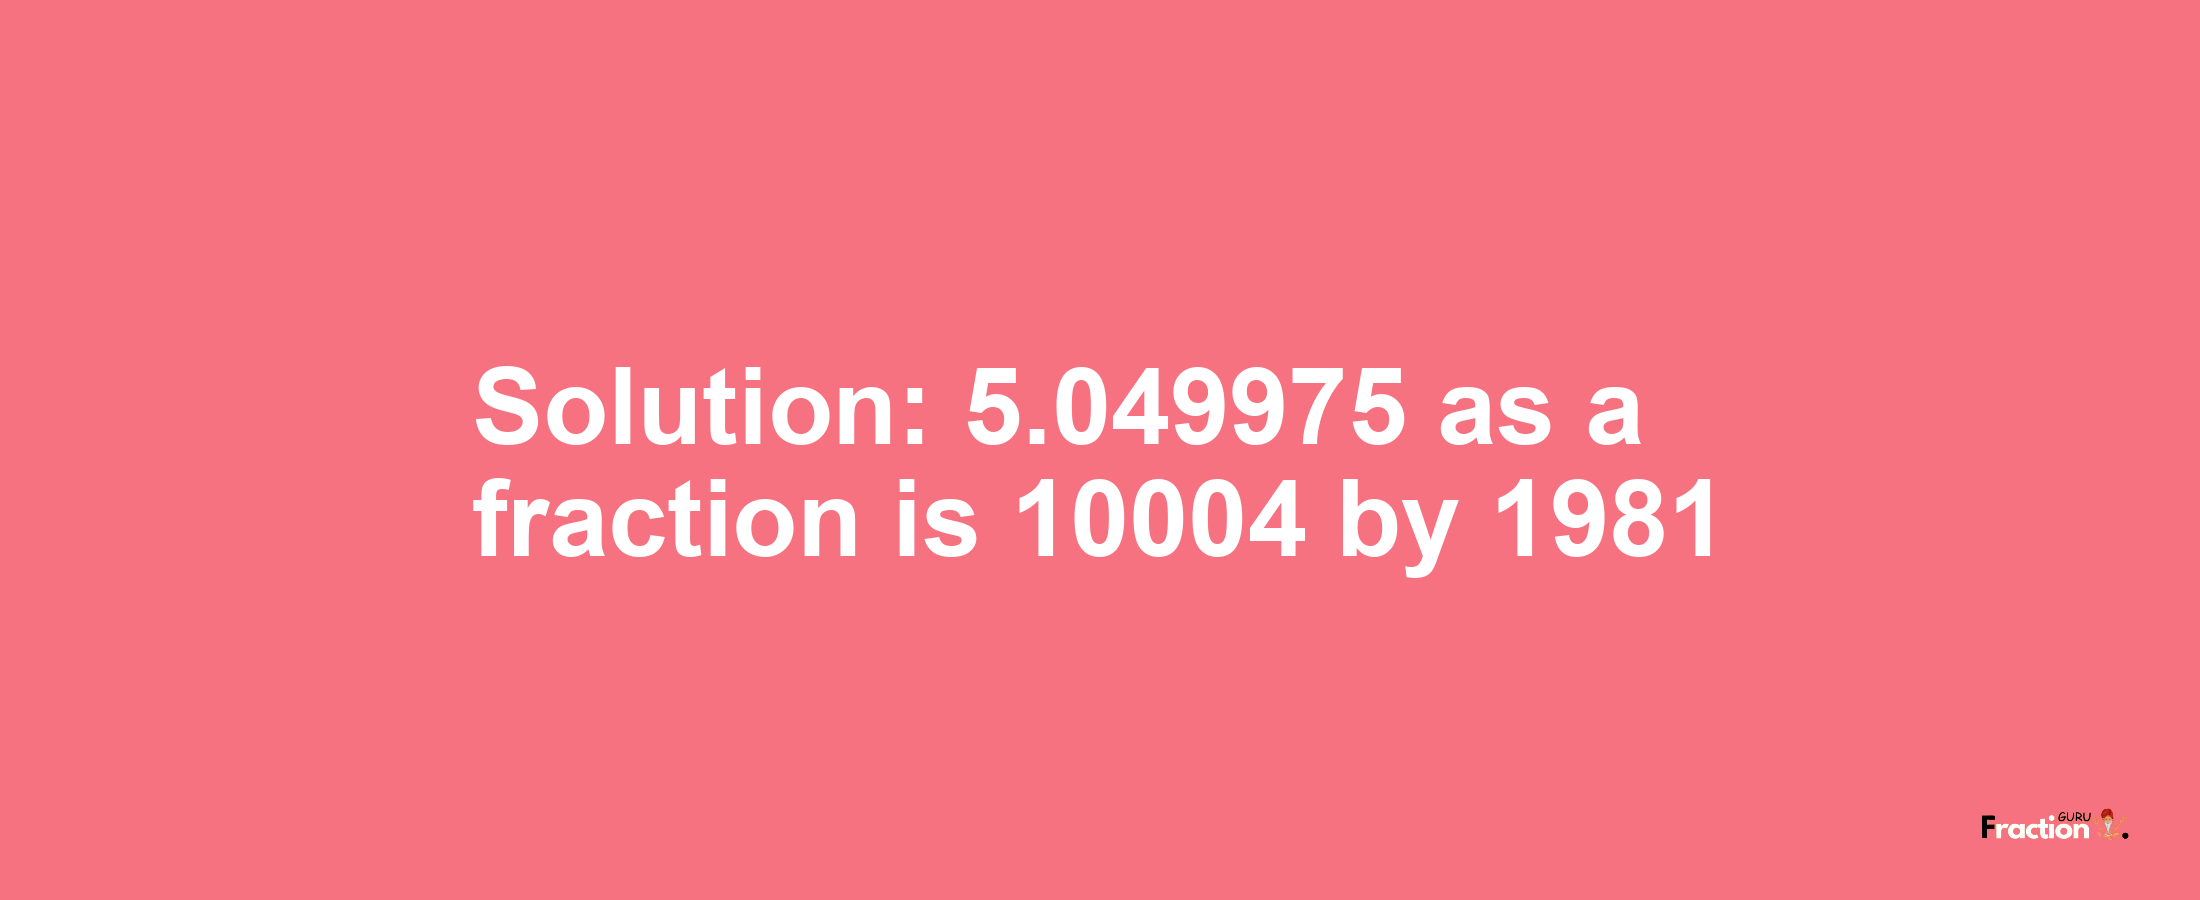 Solution:5.049975 as a fraction is 10004/1981